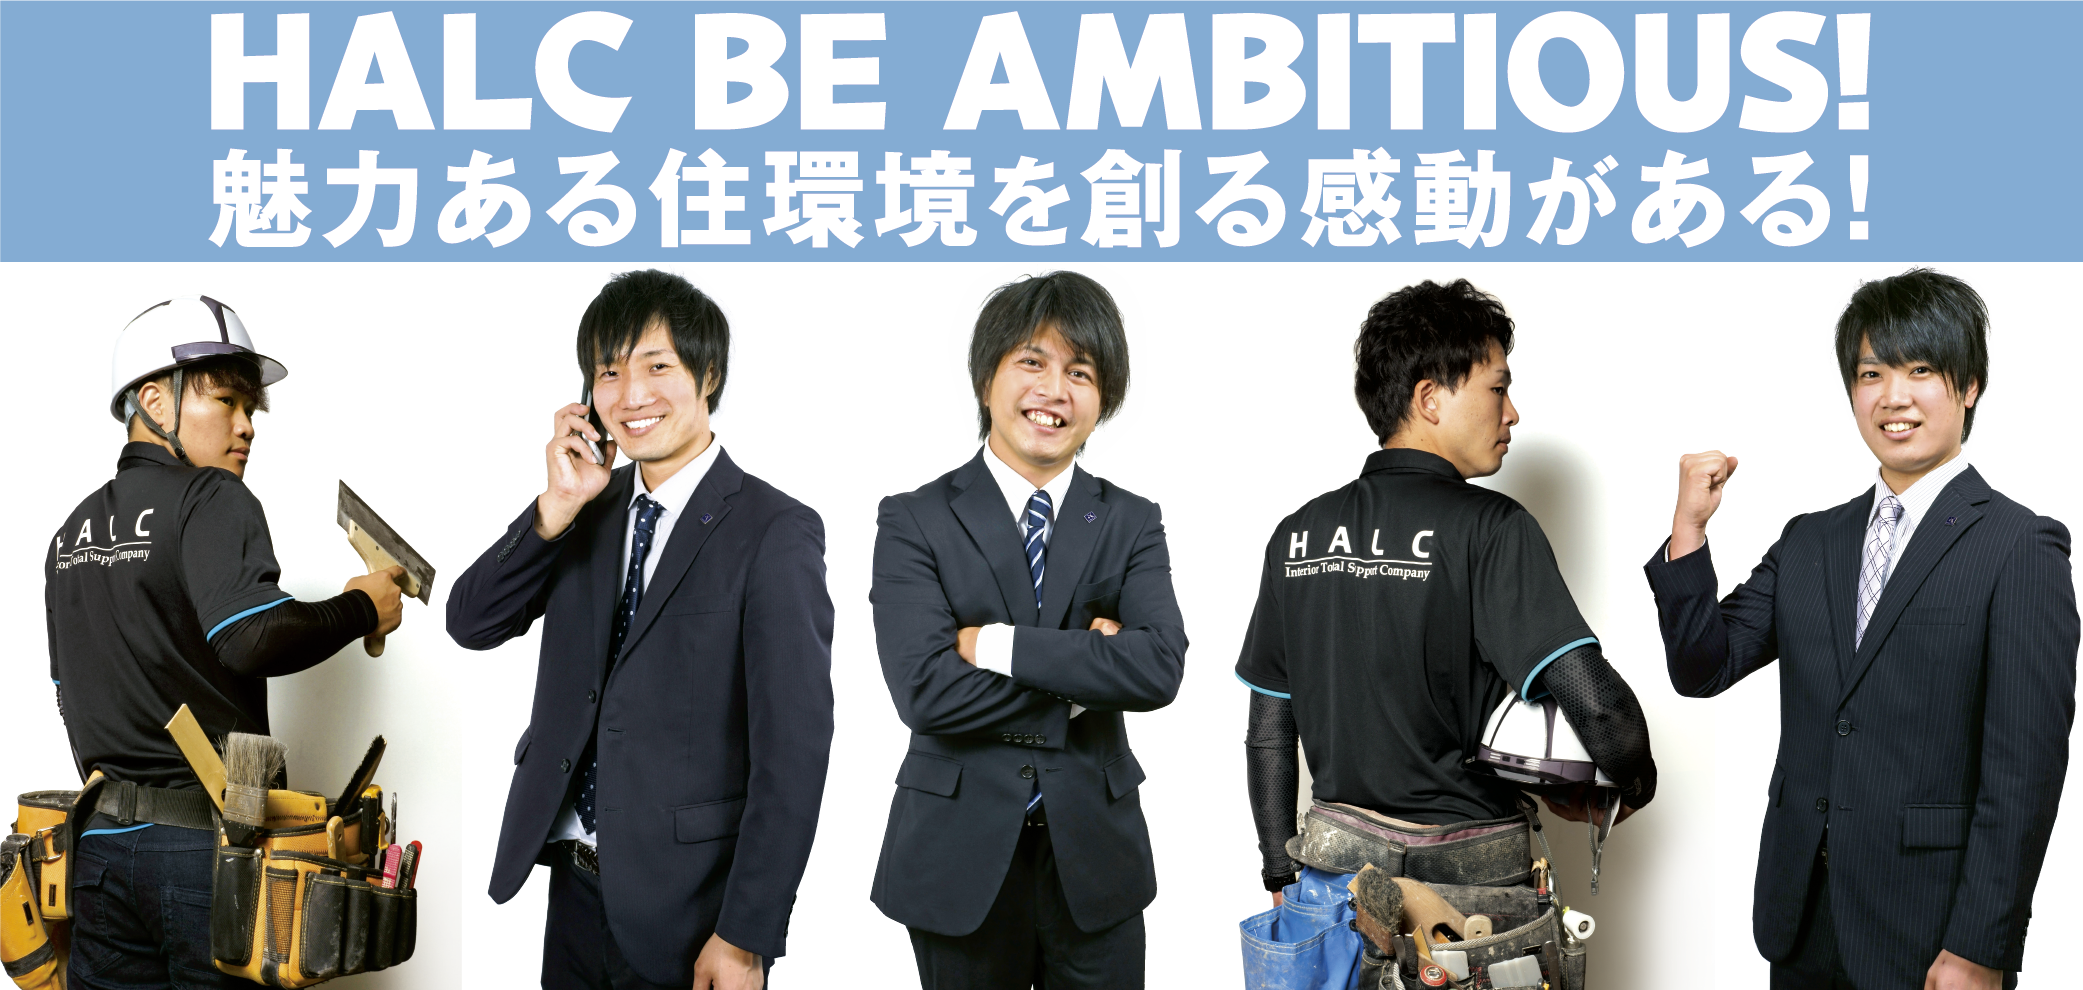 HALC BE AMBITIOUS!